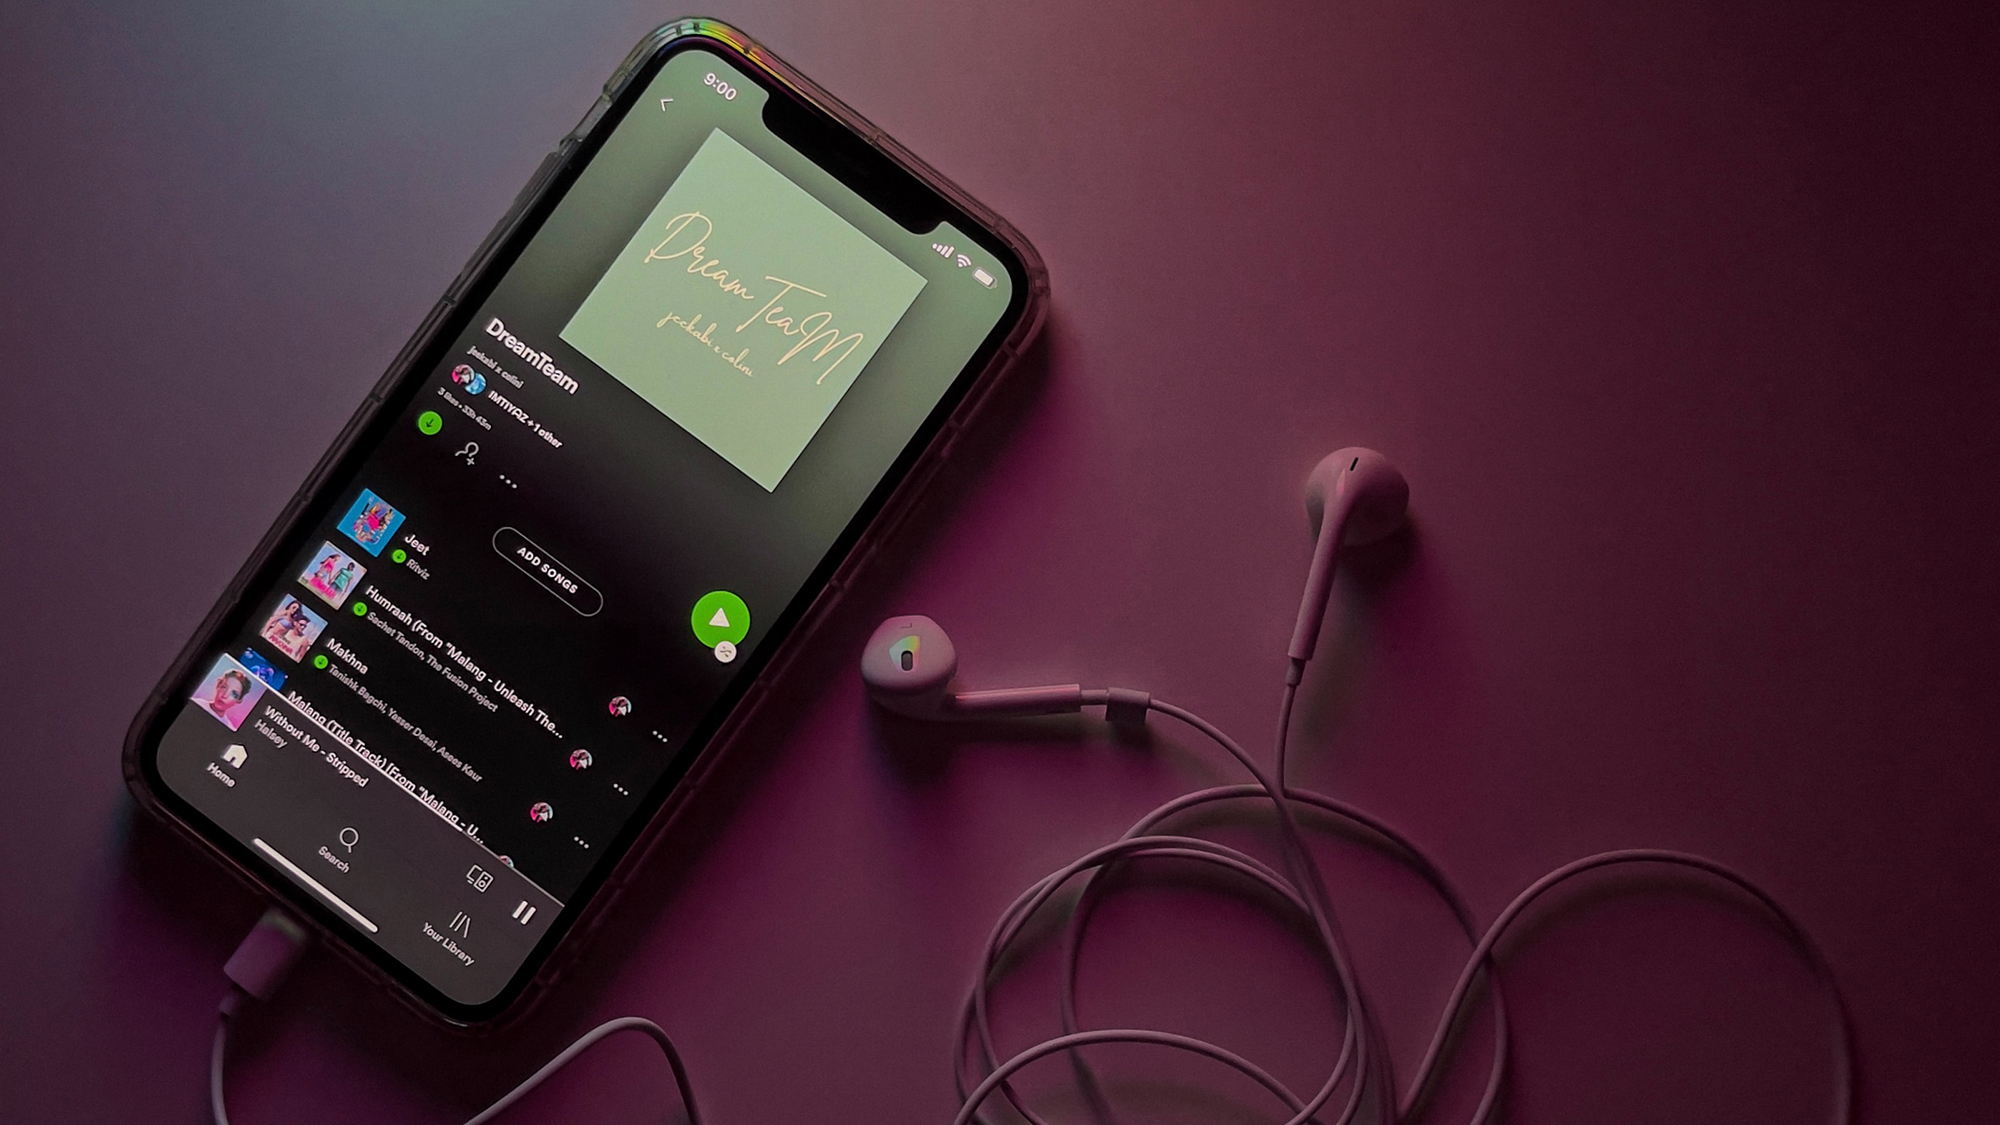 An iPhone connected to white, wired earbuds showing a Spotify playlist on the screen.